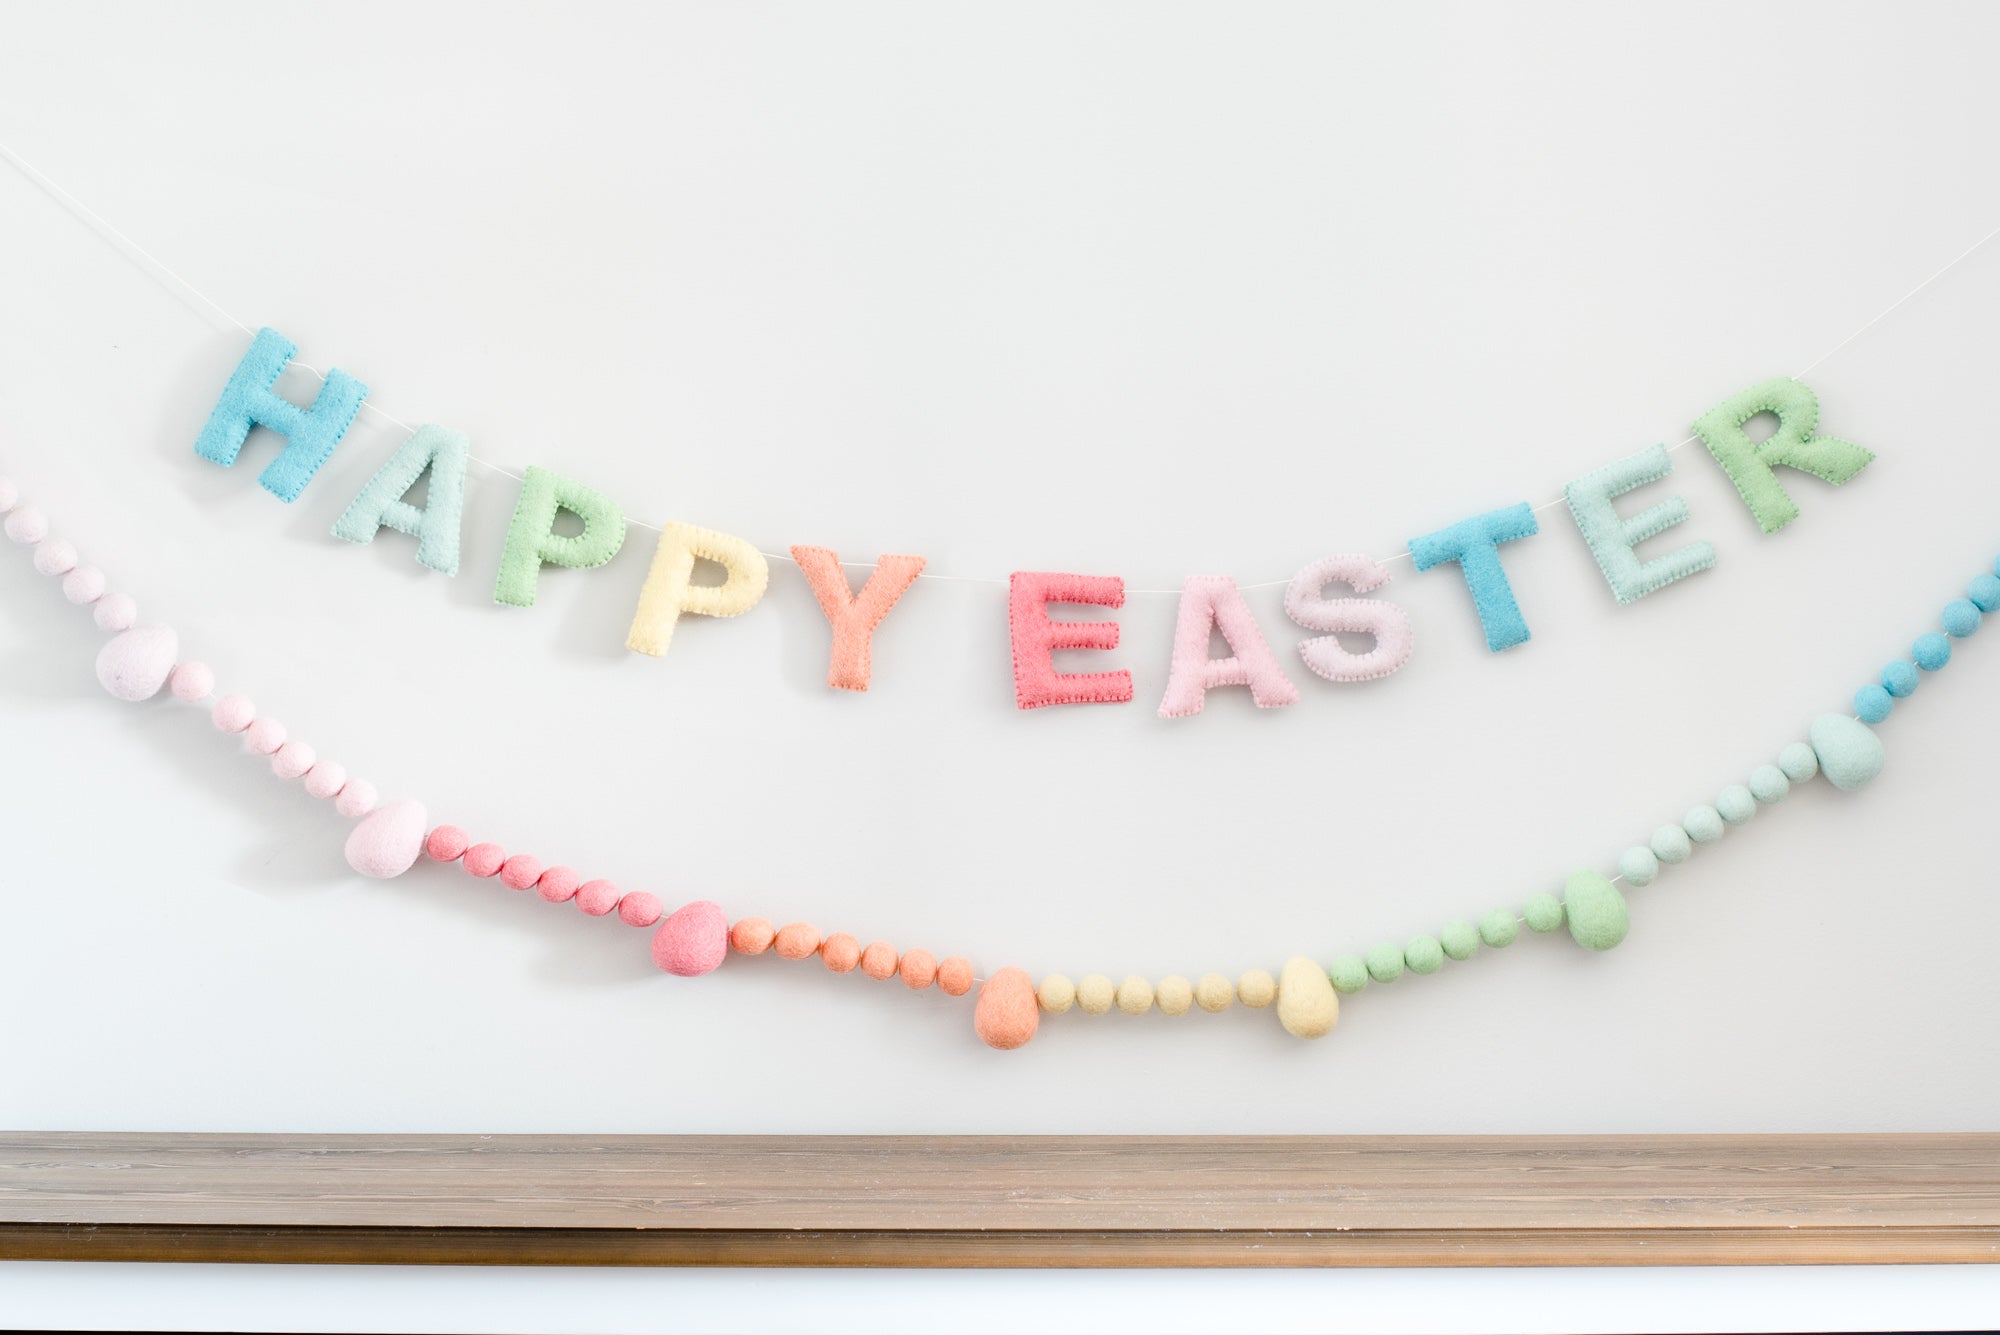 Happy Easter Garland